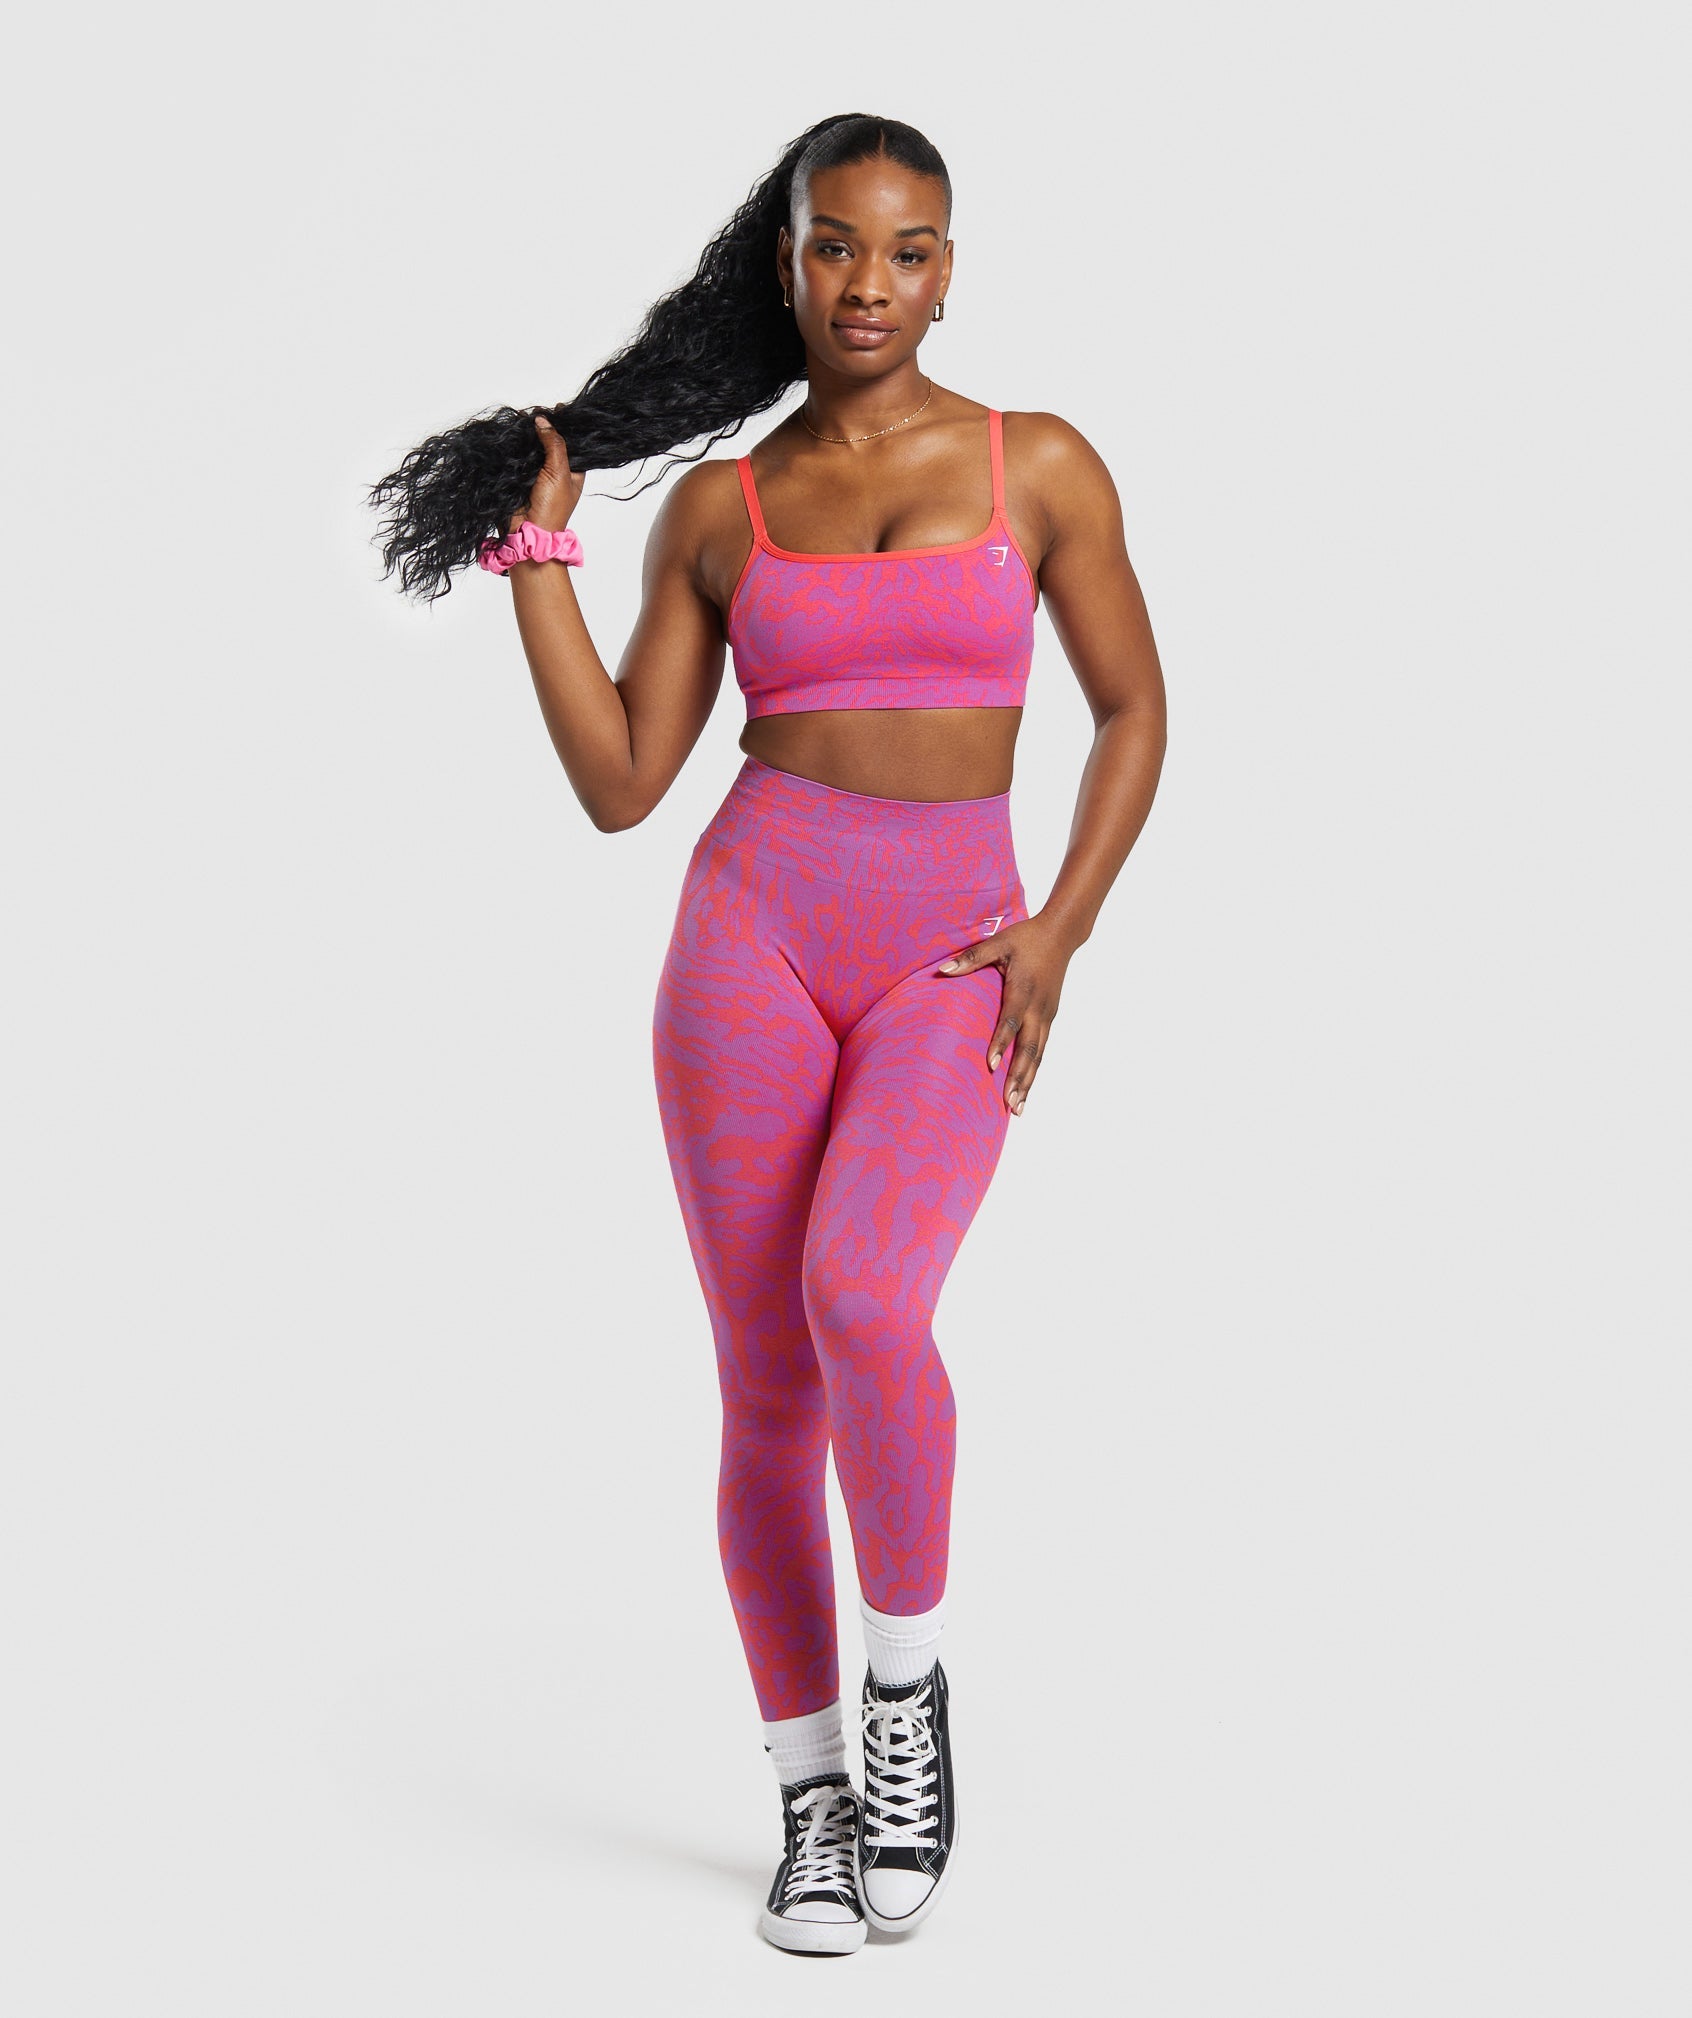 Adapt Safari Seamless Sports Bra in Shelly Pink/Fly Coral - view 4